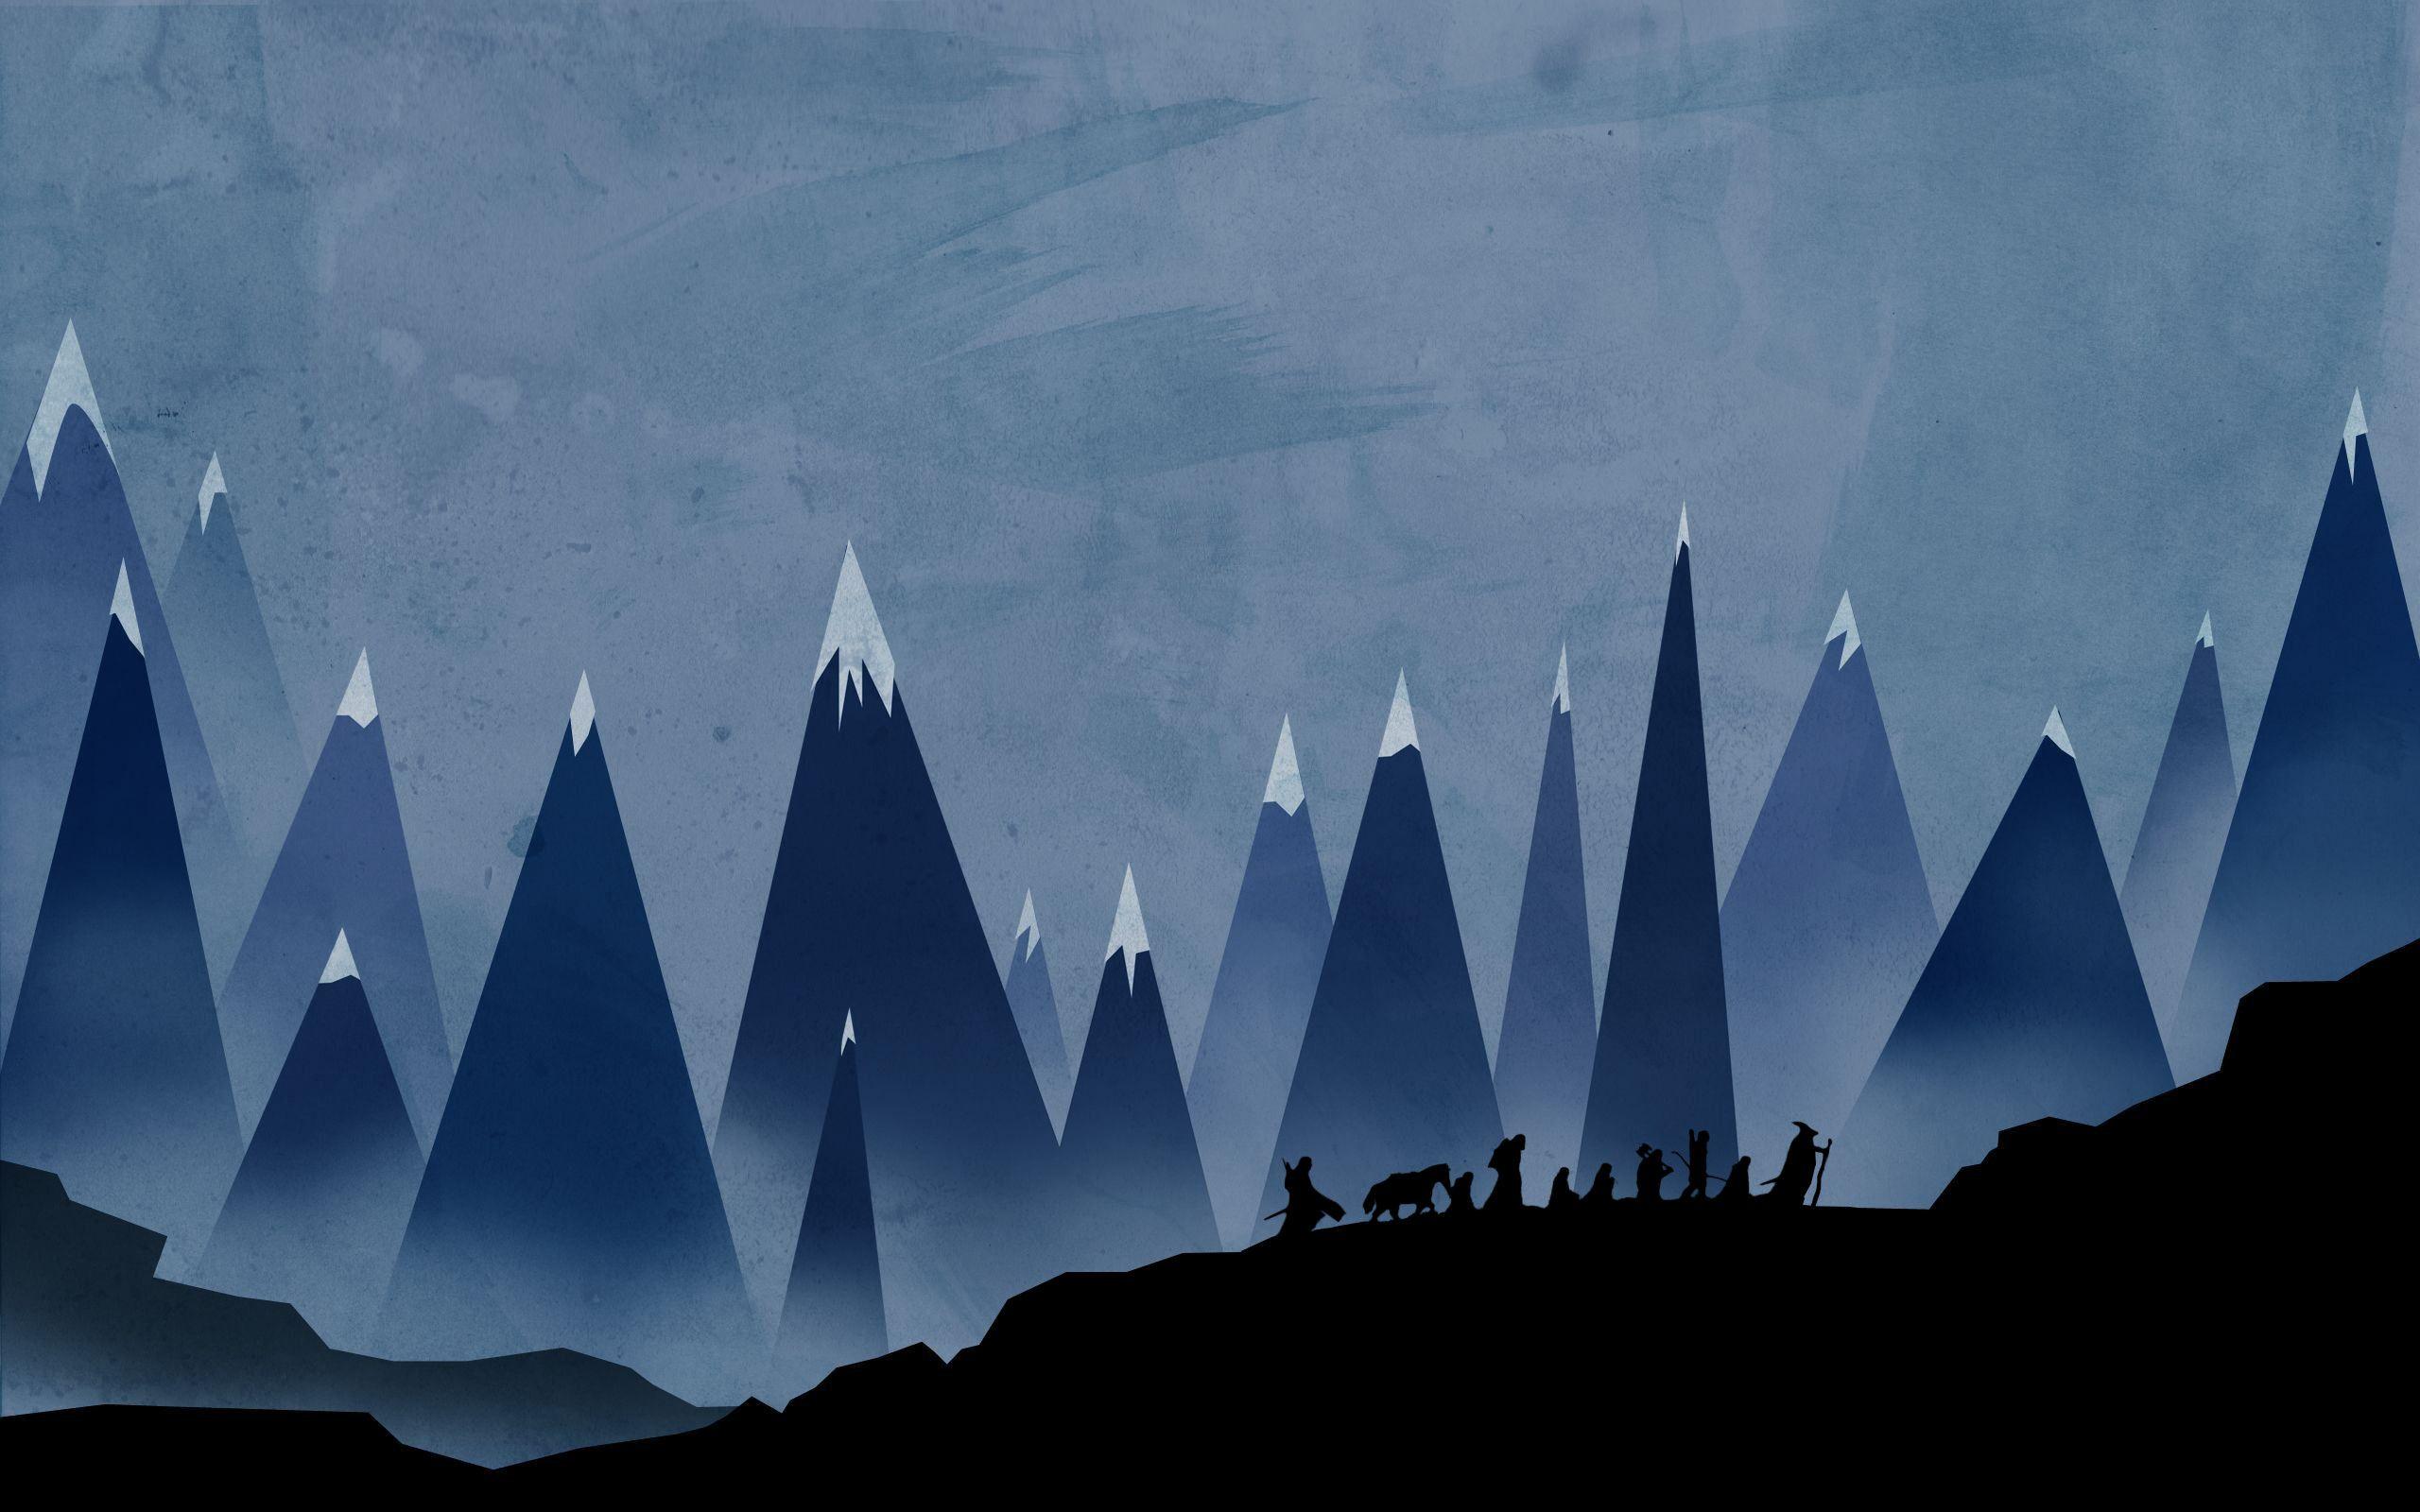 I made a low poly Fellowship silhouette wallpaper